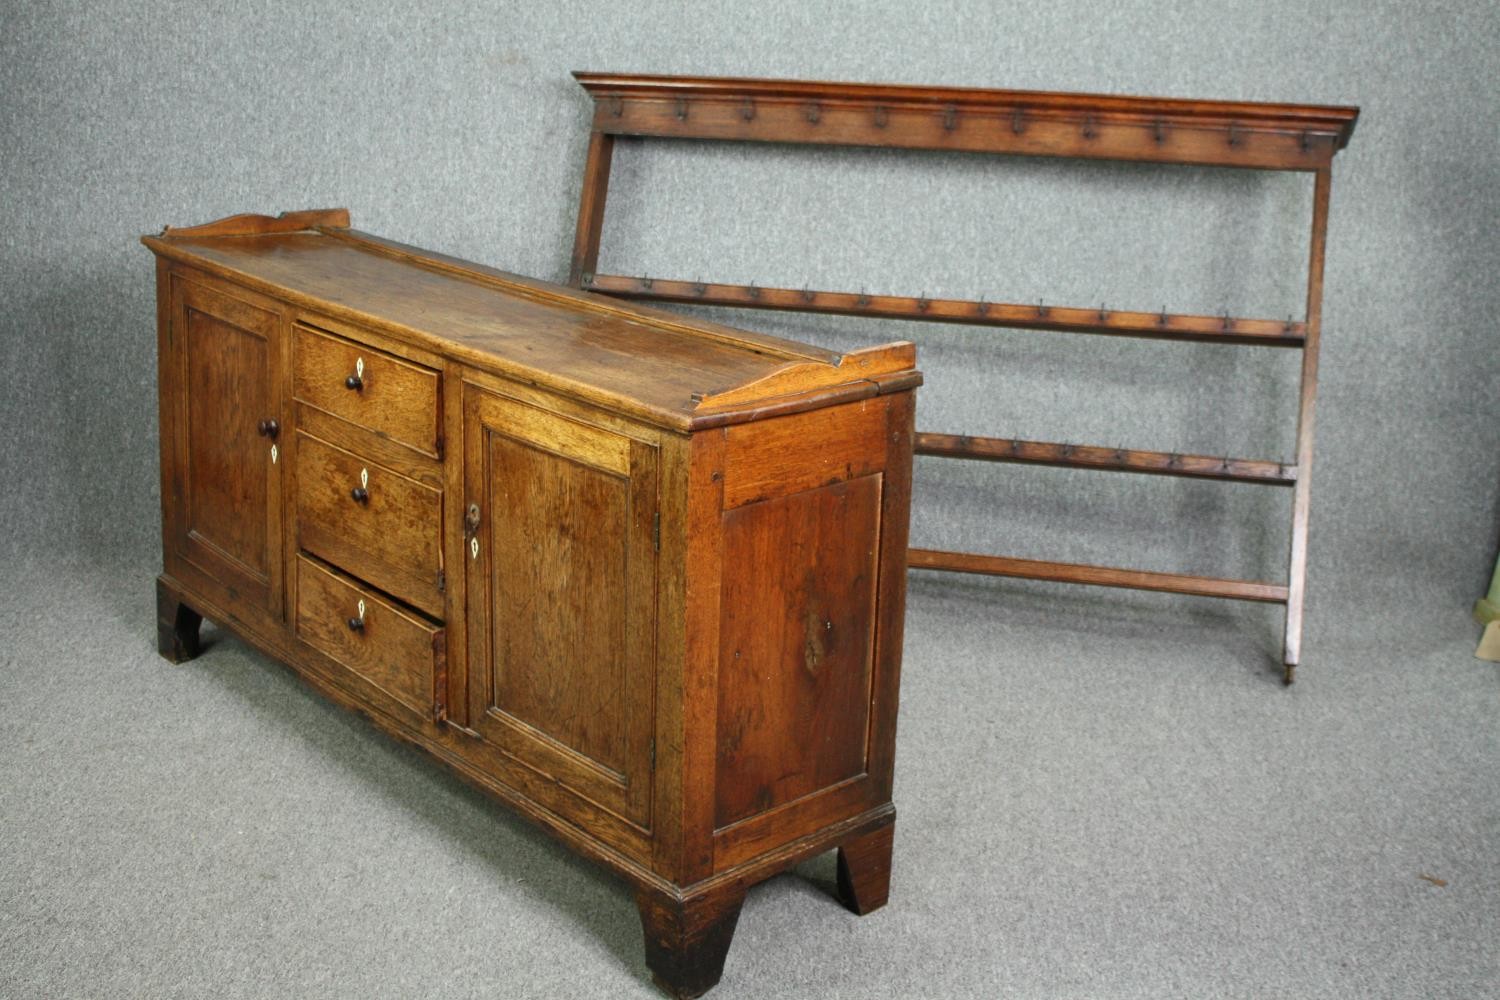 Dresser, 19th century country oak with upper open plate rack above base fitted with drawers - Image 11 of 11